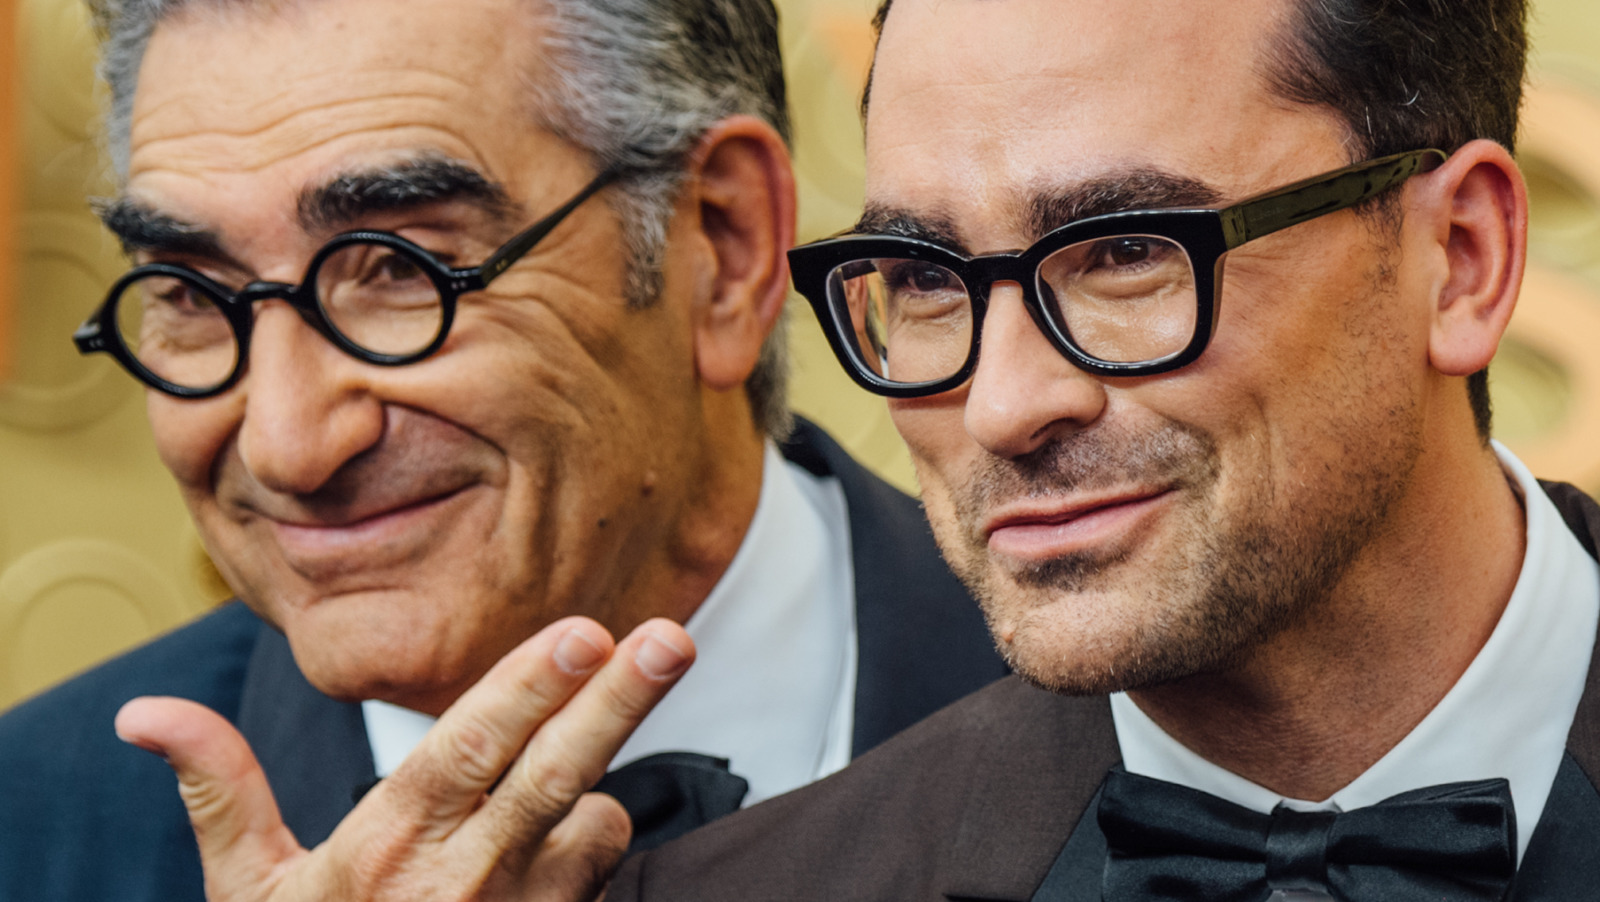 Inside Eugene Levy's Relationship With Dan Levy